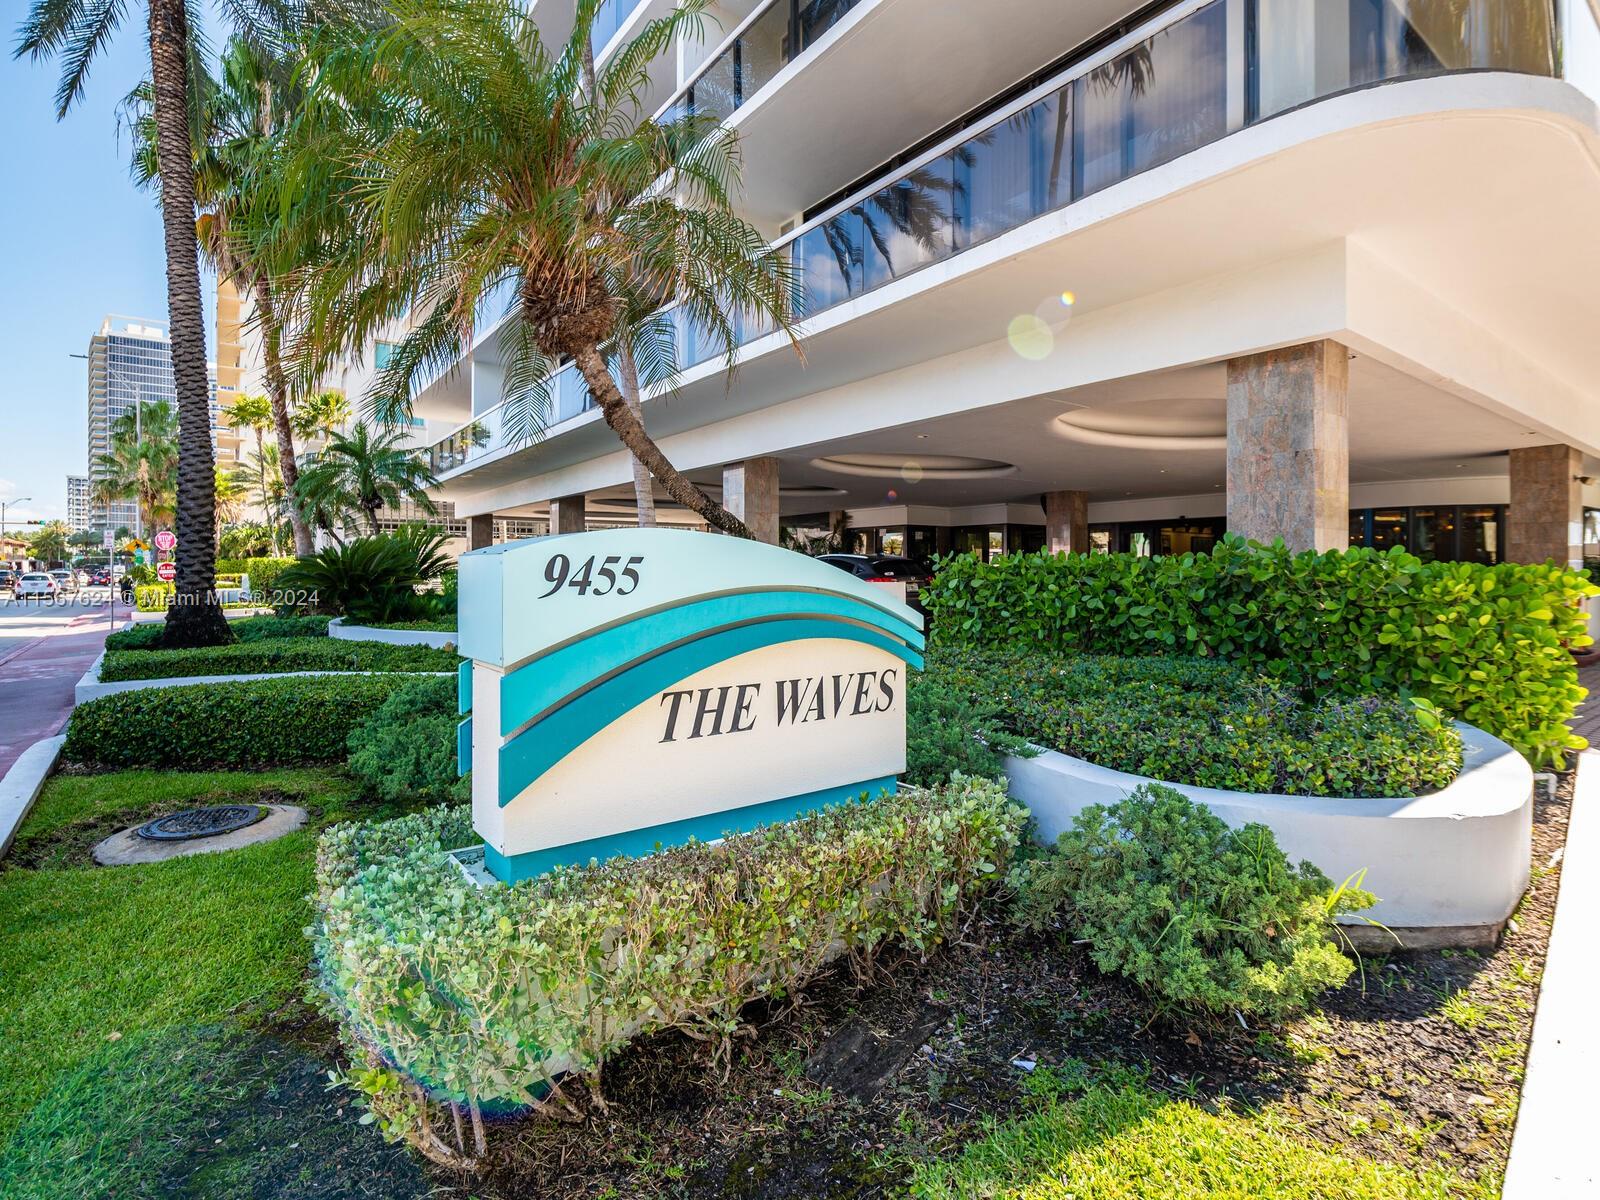 The Waves of Surfside Oceanfront Building. Winter Seasonal rental is Available Immediately for a Minimum of 6 Months. Very comfortable Fully Equipped, Split 2 Bedroom 2 Bath with very open West Views. Fantastic, Location Center of Surfside Shopping District, and A short distance to the Bal Harbour Shops. Rental Payments included cable and internet, 24-hour doorman security, Valet Parking, 1 Self Parking Space, a Gym, a Pool, Jacuzzi, and Beach Service.